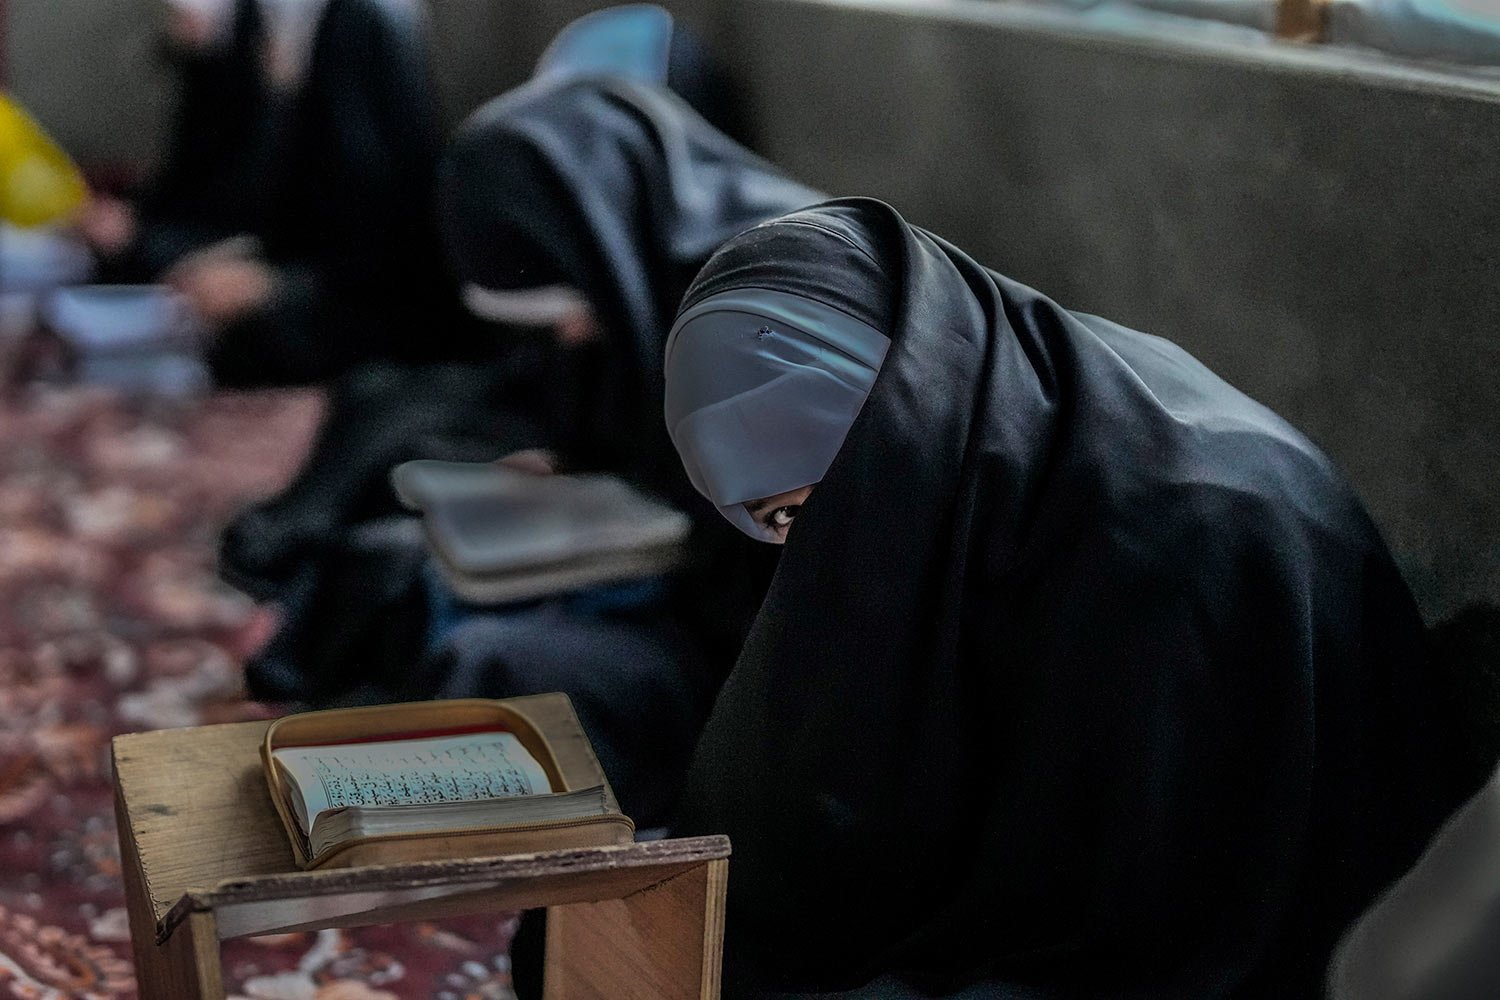  A Kashmiri Muslim girl reacts to camera as she attends recitation classes of the holy Quran during the fasting month of Ramadan in Srinagar, Indian-controlled Kashmir, Sunday, March 26, 2023. (AP Photo/Mukhtar Khan) 